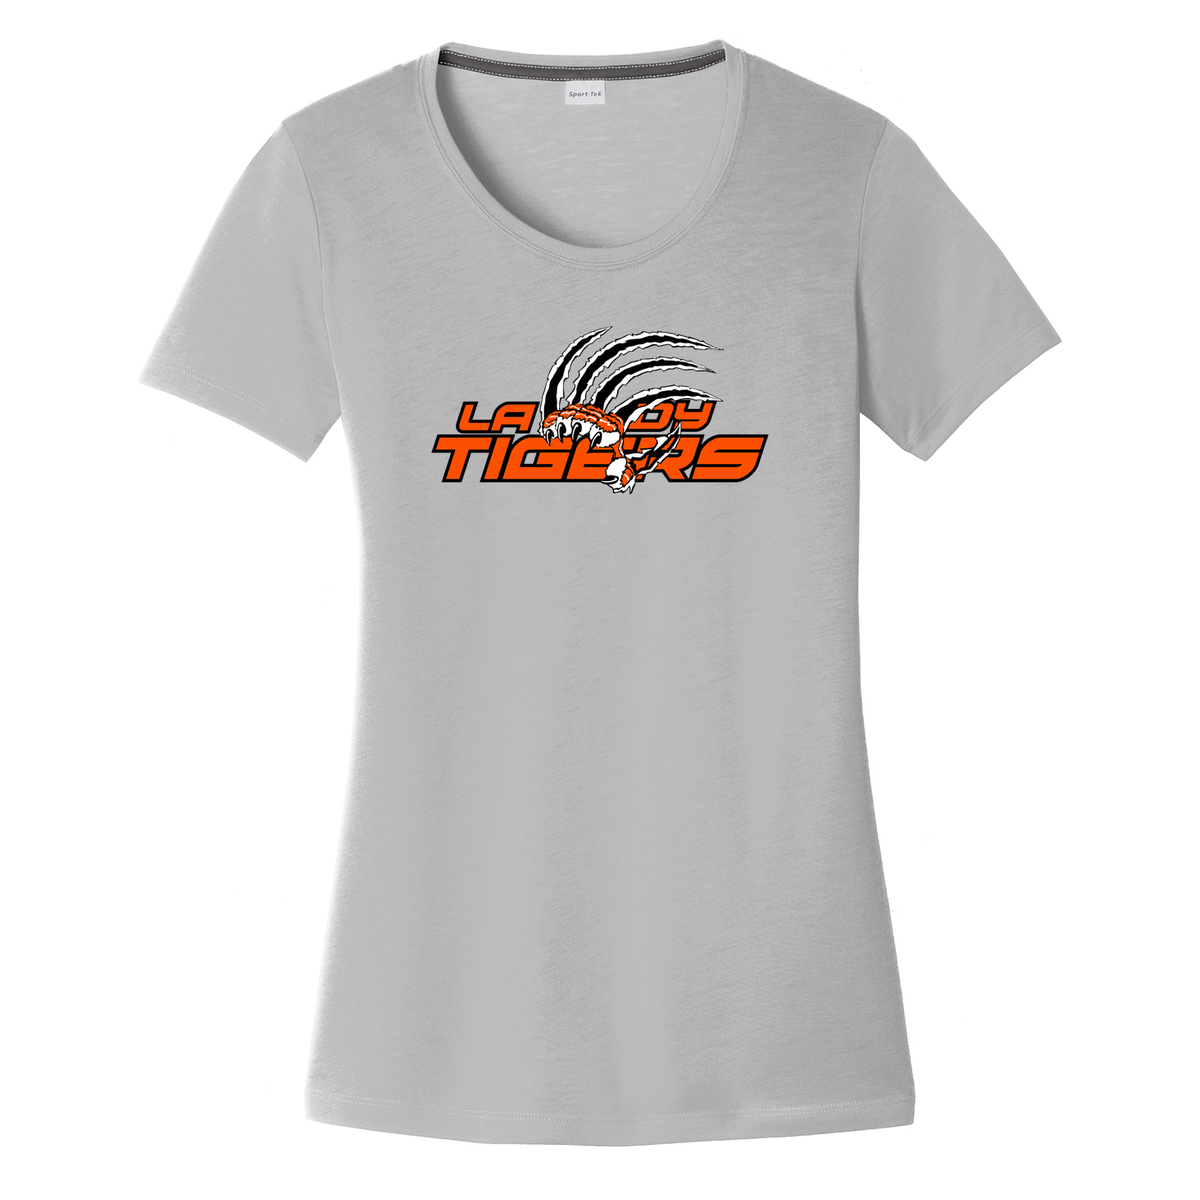 Lady Tiger Women's CottonTouch Performance T-Shirt